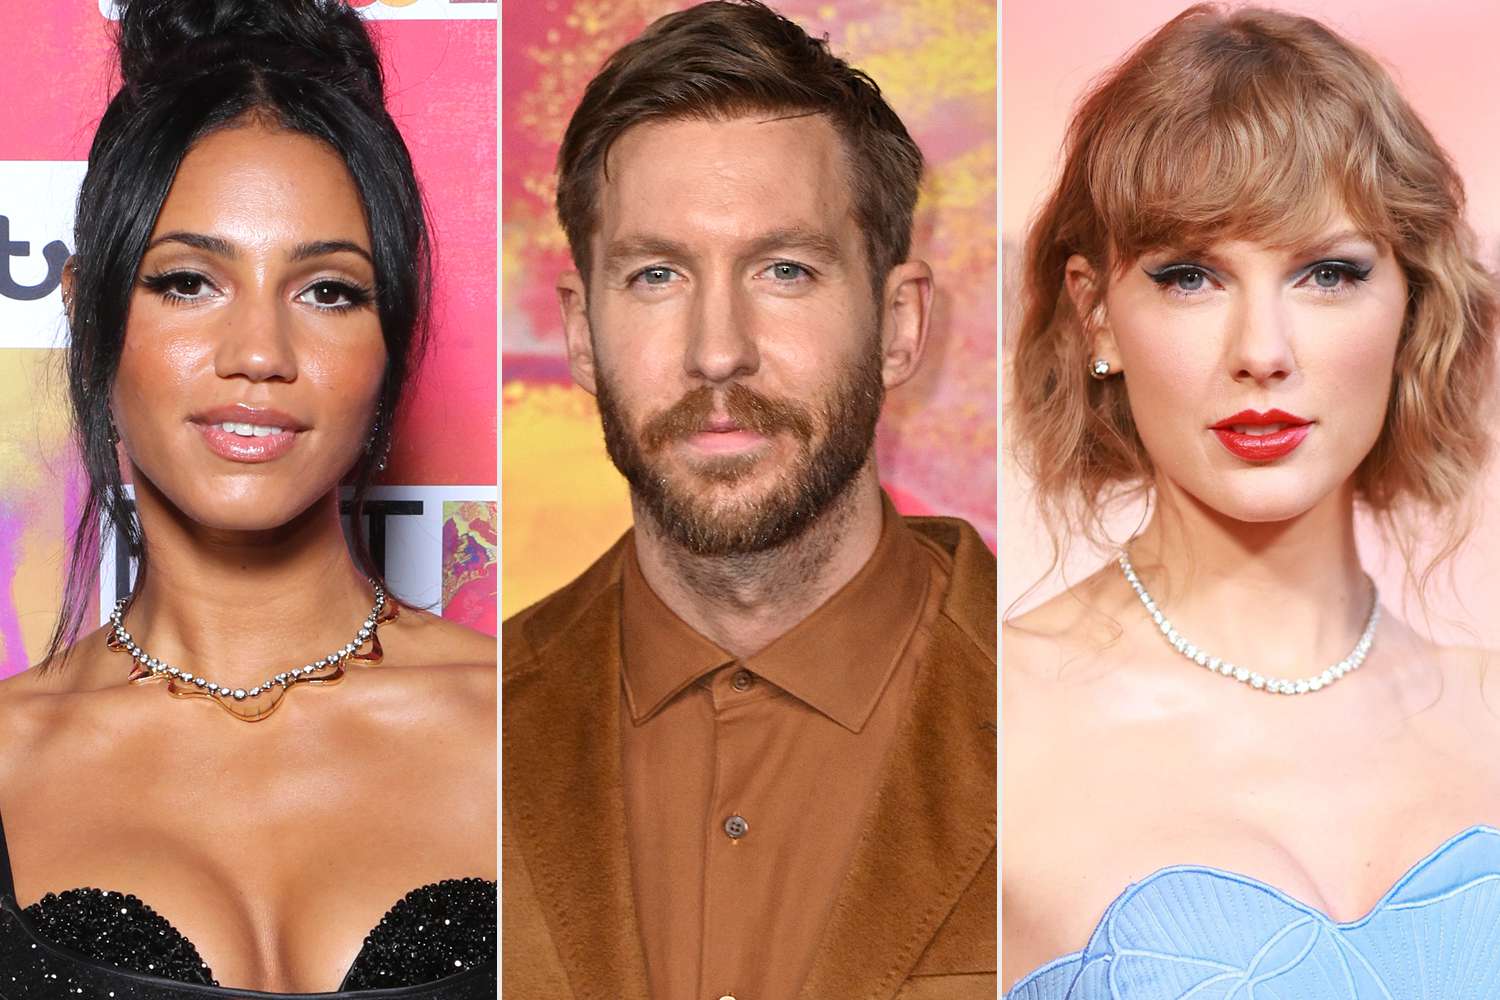 Calvin Harris' Wife Says She Listens to Taylor Swift When He's Away